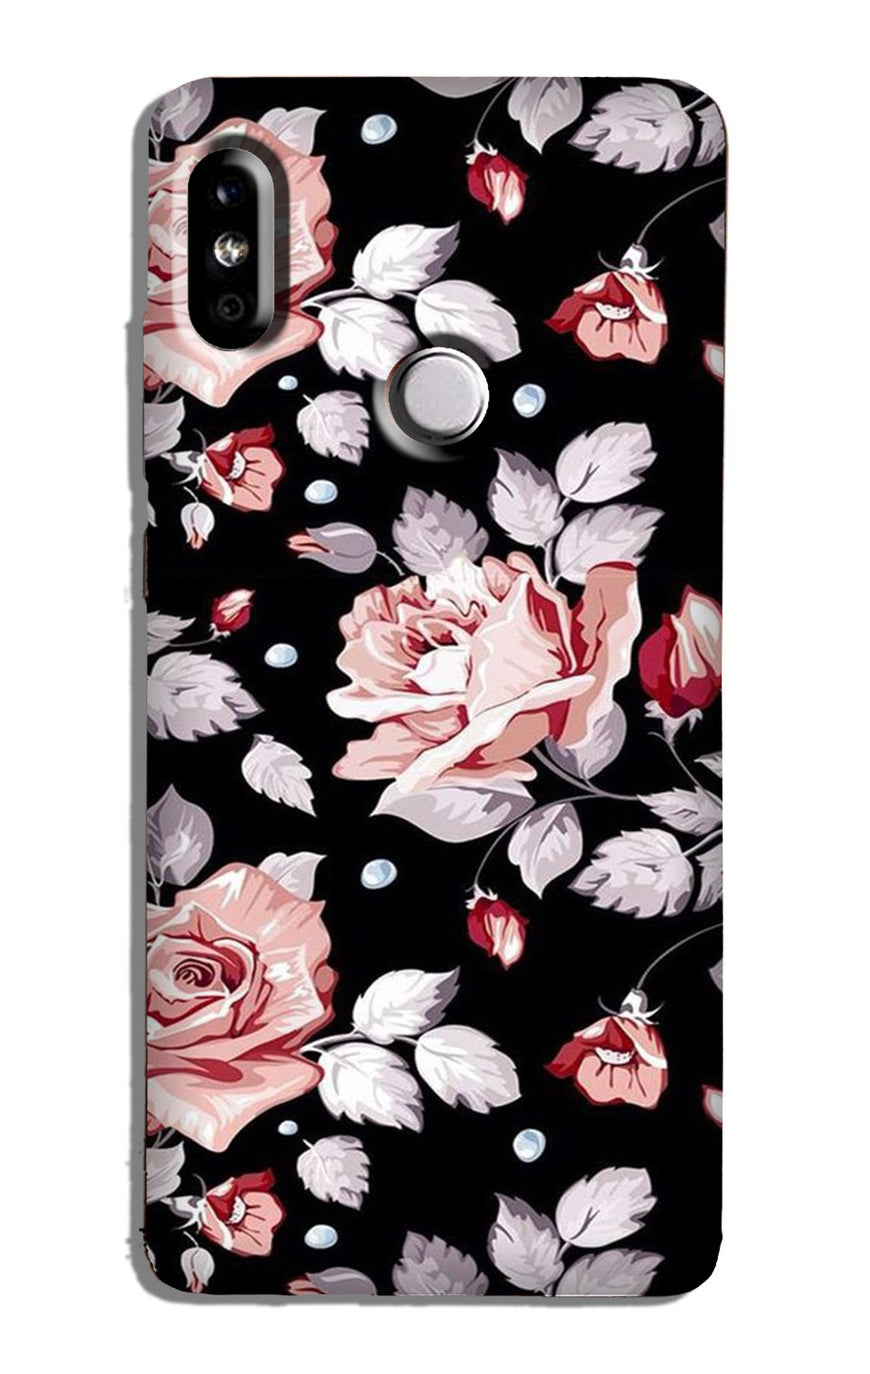 Pink rose Case for Redmi 6 Pro